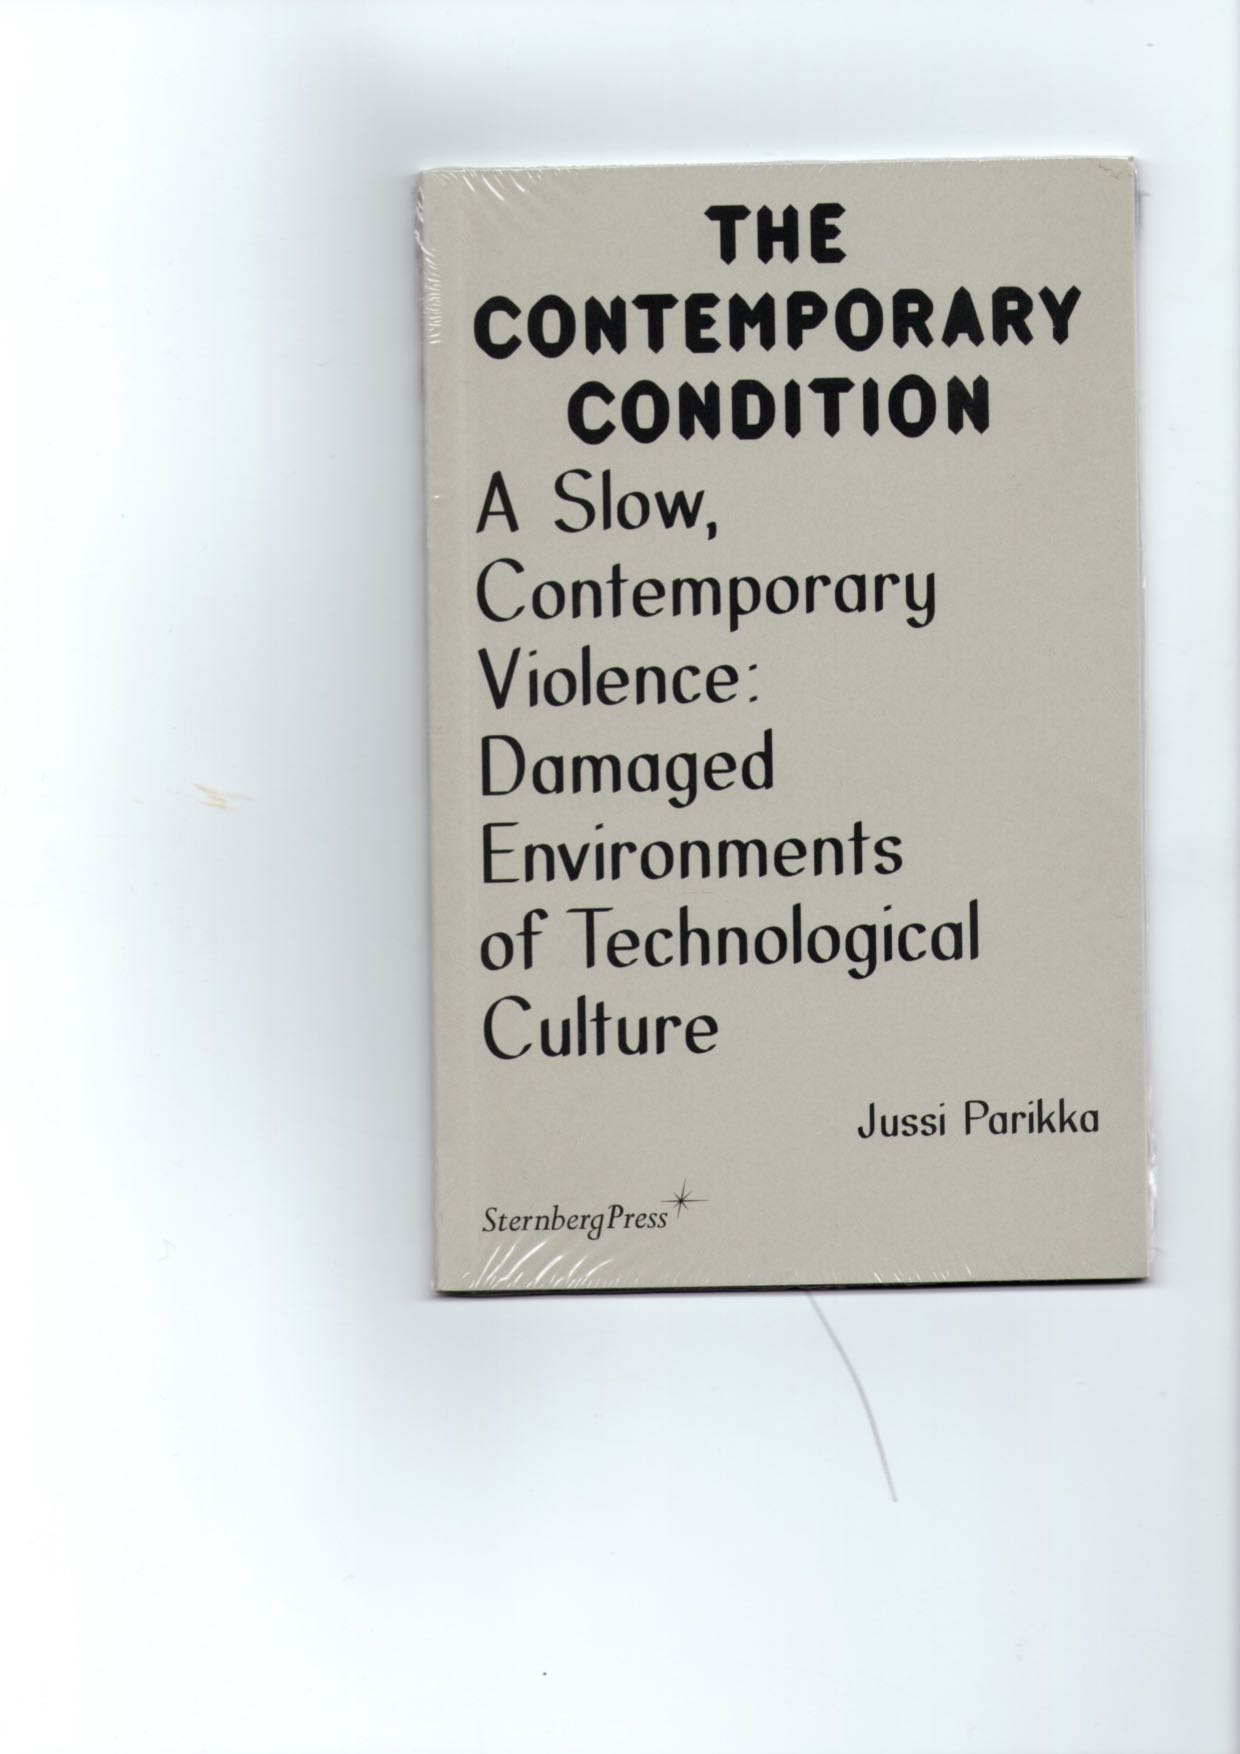 PARIKKA, Jussi - The Contemporary Condition. A Slow, Contemporary Violence: Damaged Environments of Technological Culture